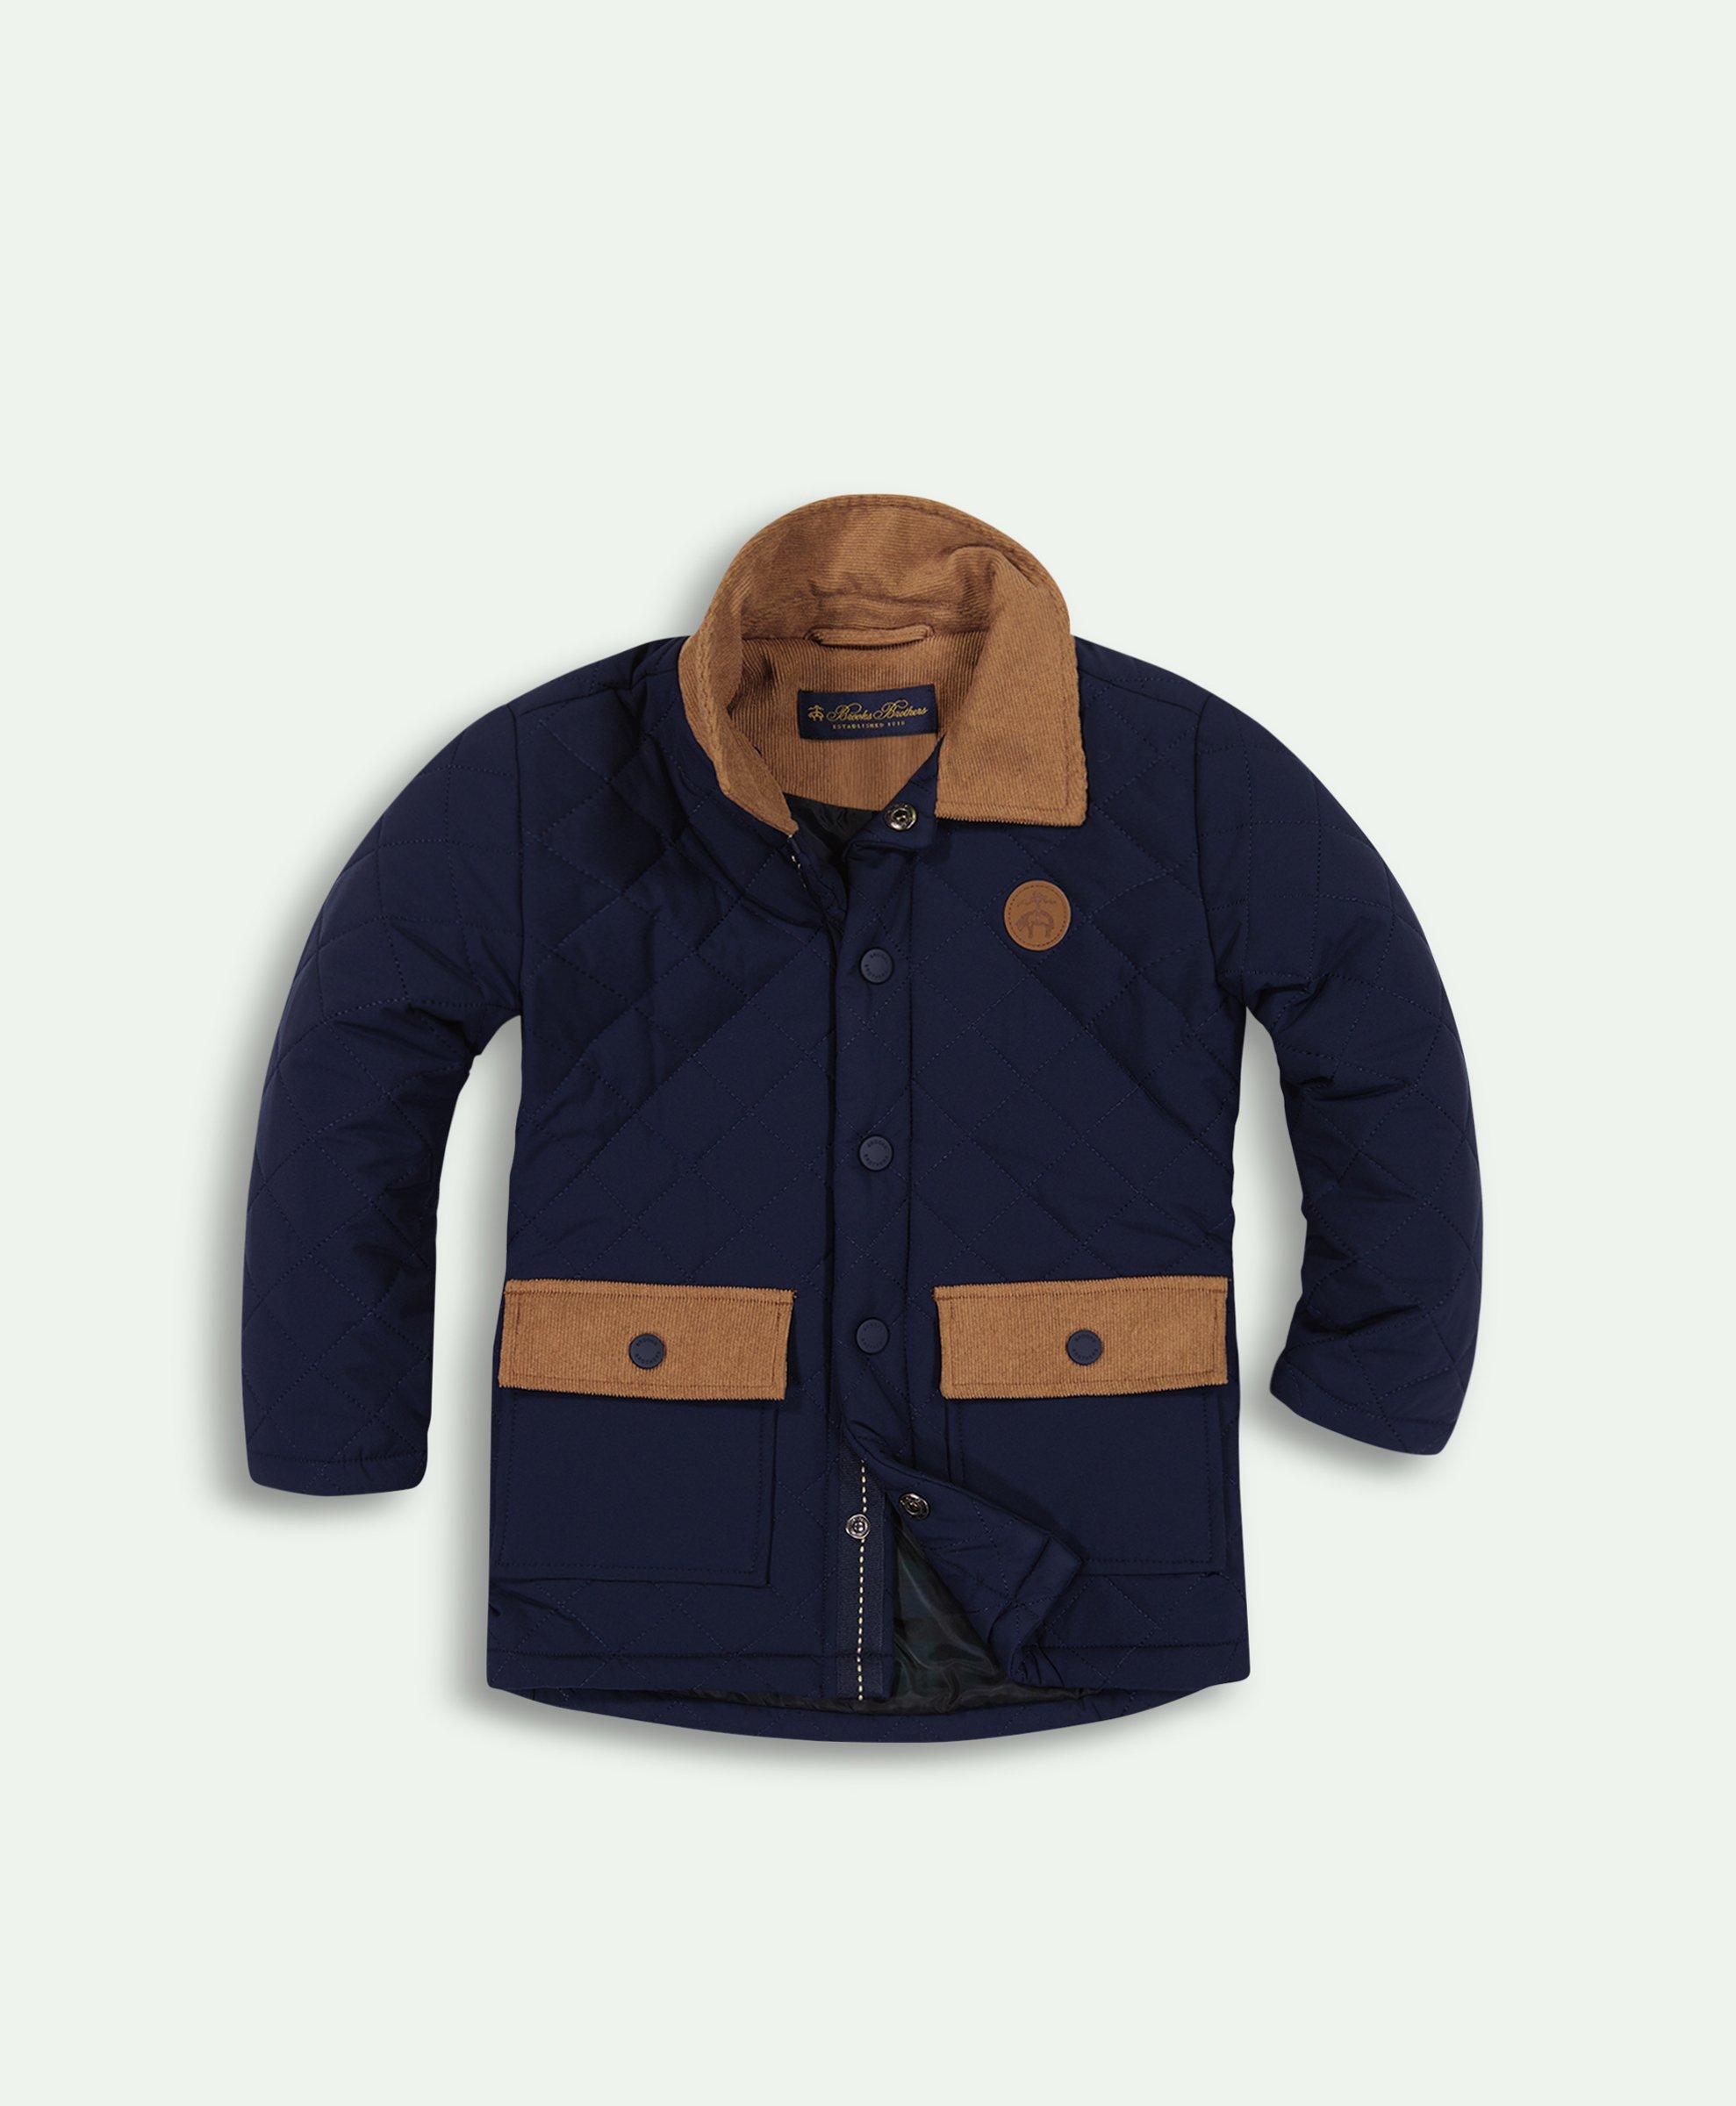 Kids Quilted Jacket, image 1